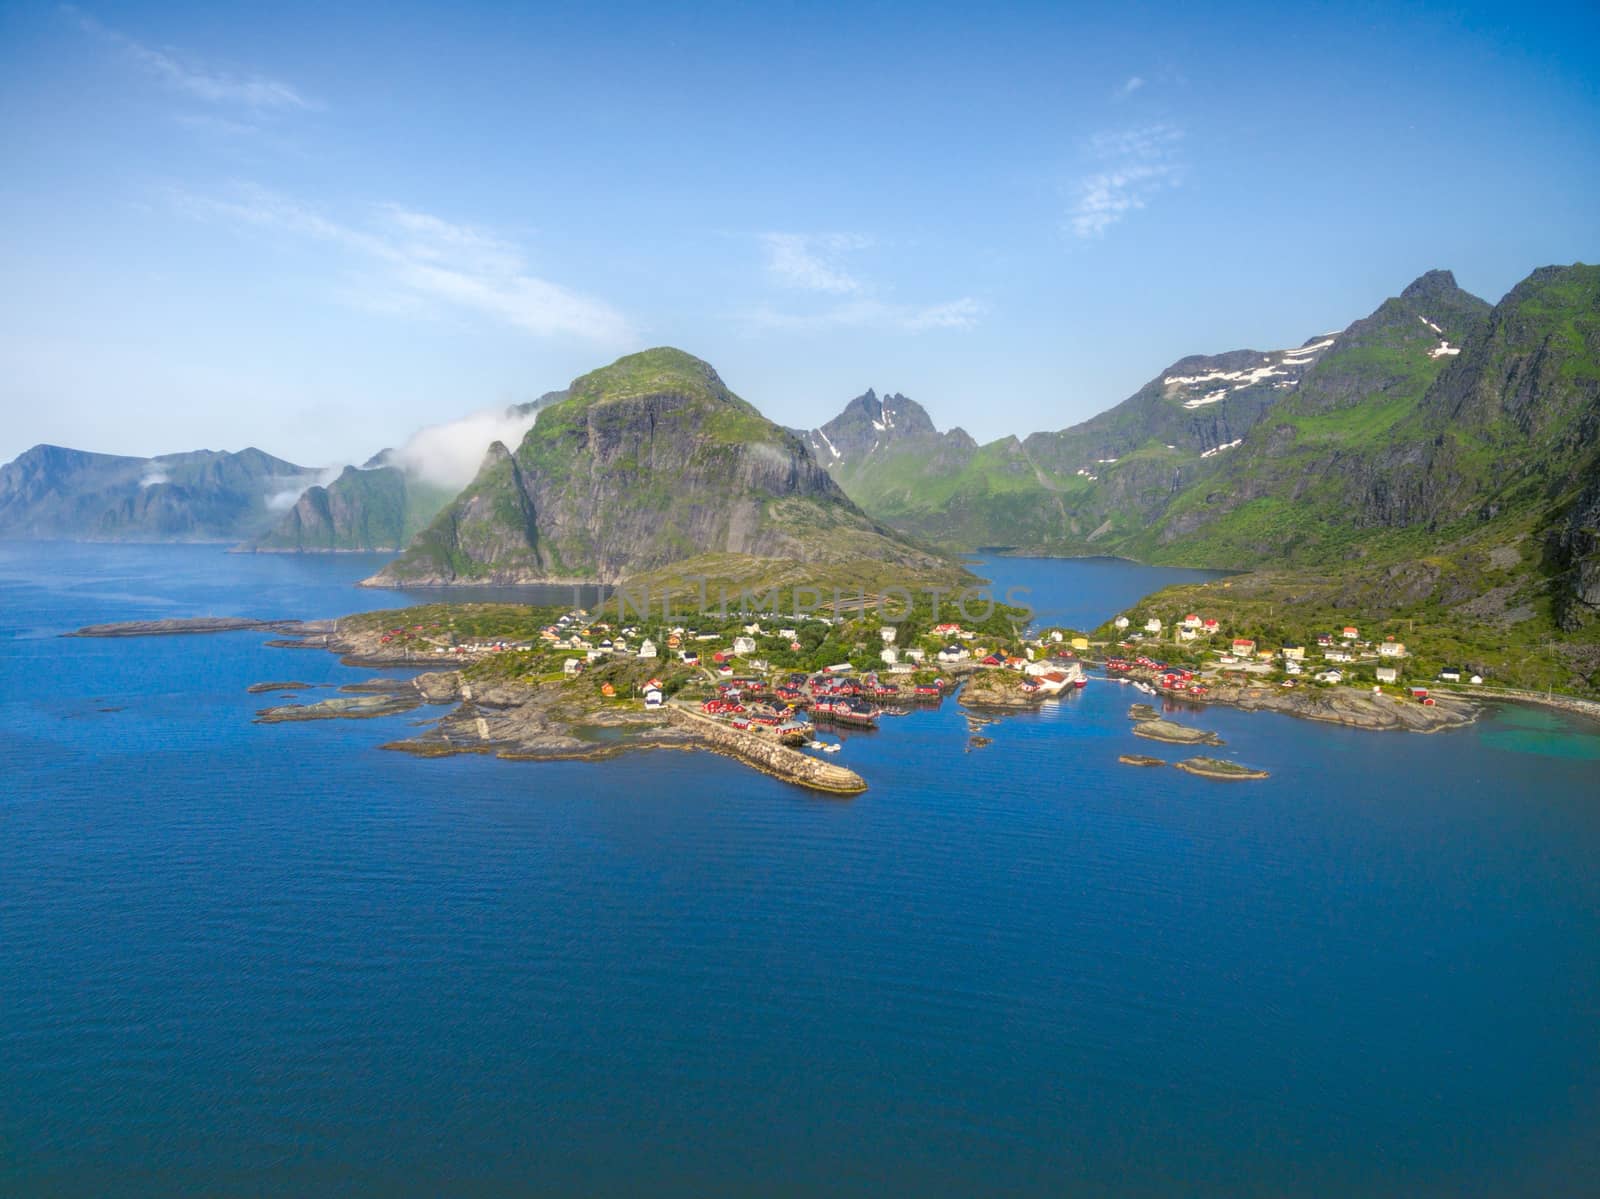 Breathtaking aerial view of scenic fishing village A on Lofoten islands in Norway with traditional red fishing huts